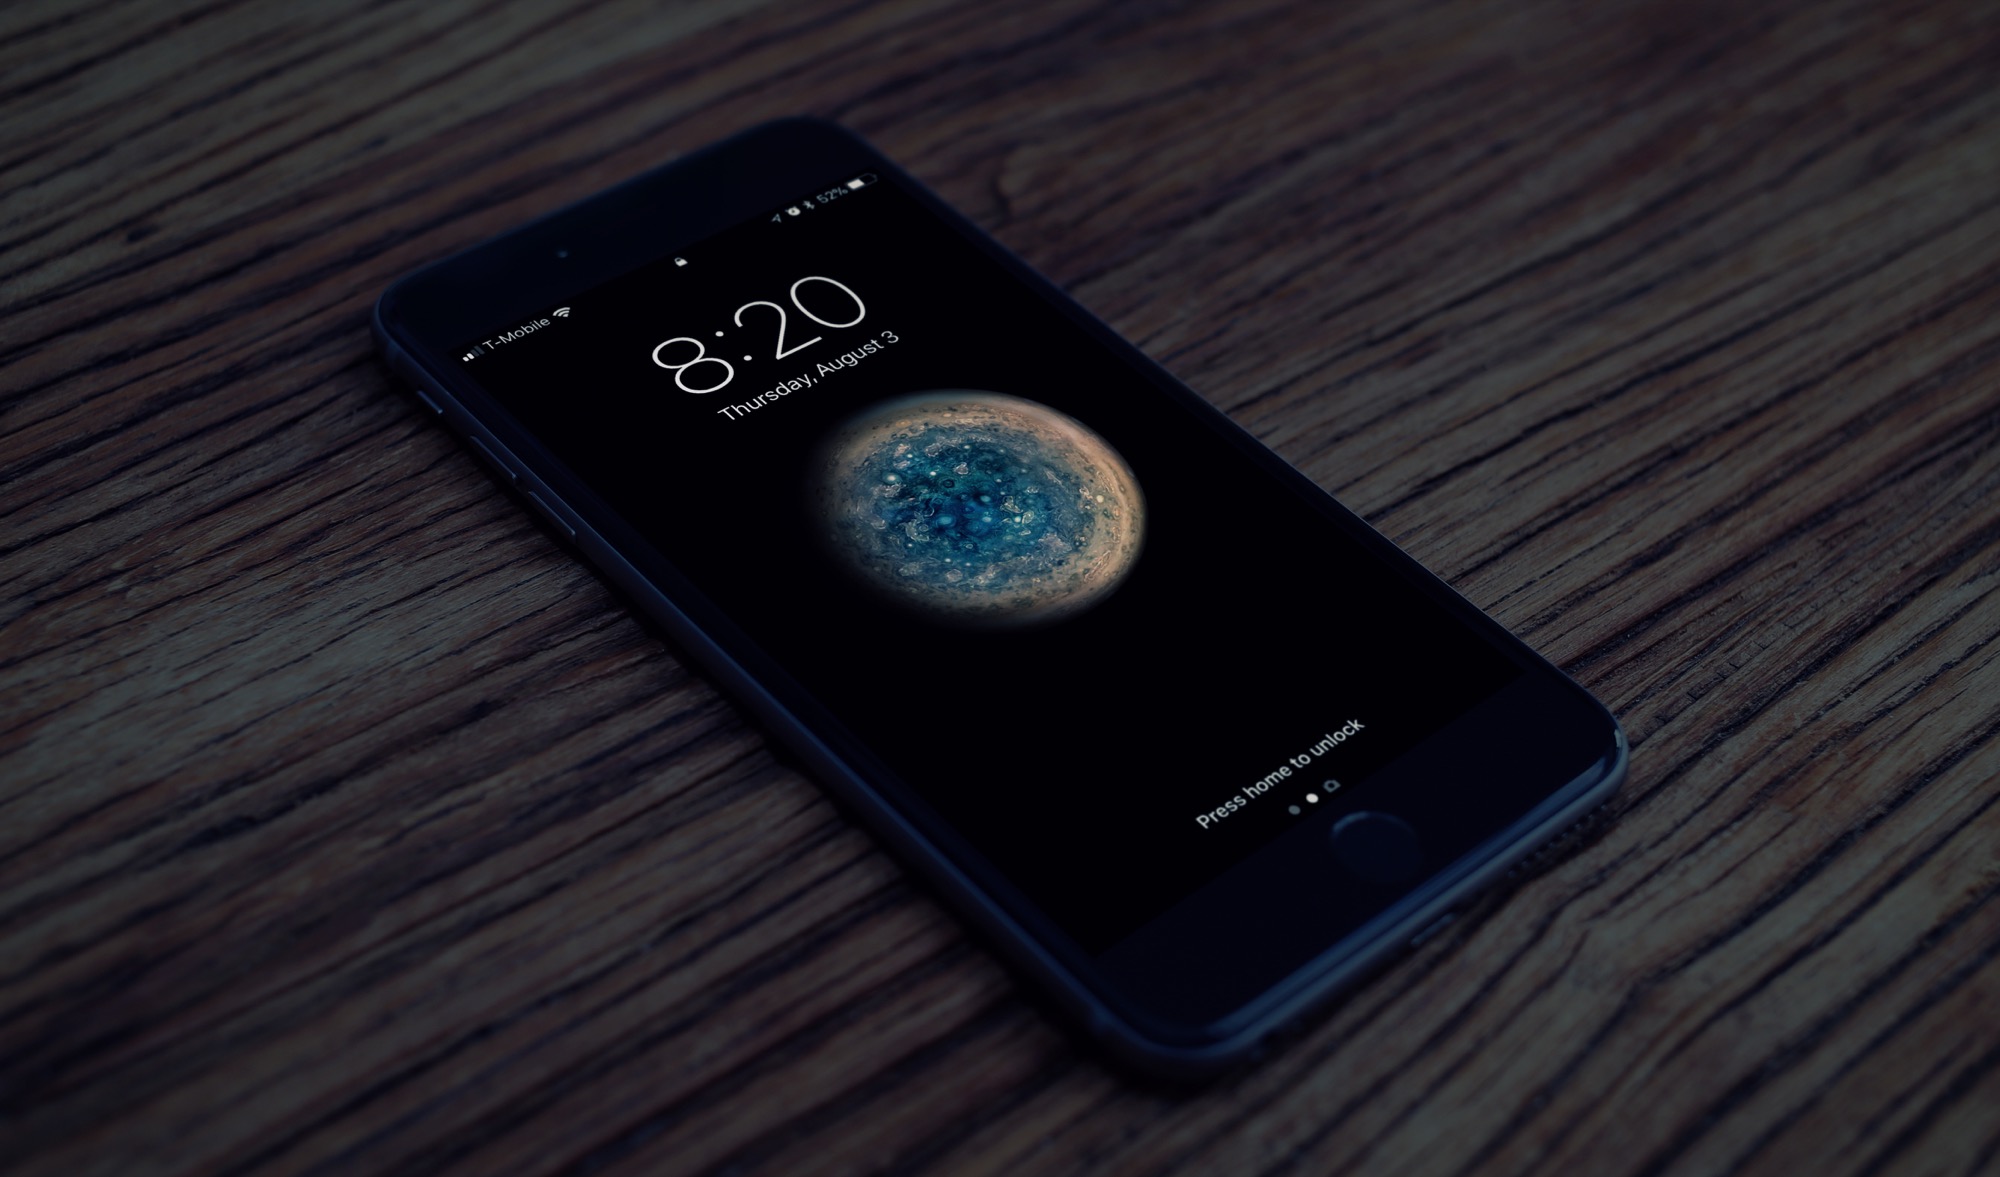 A more current wallpaper of Jupiter for iOS BirchTree